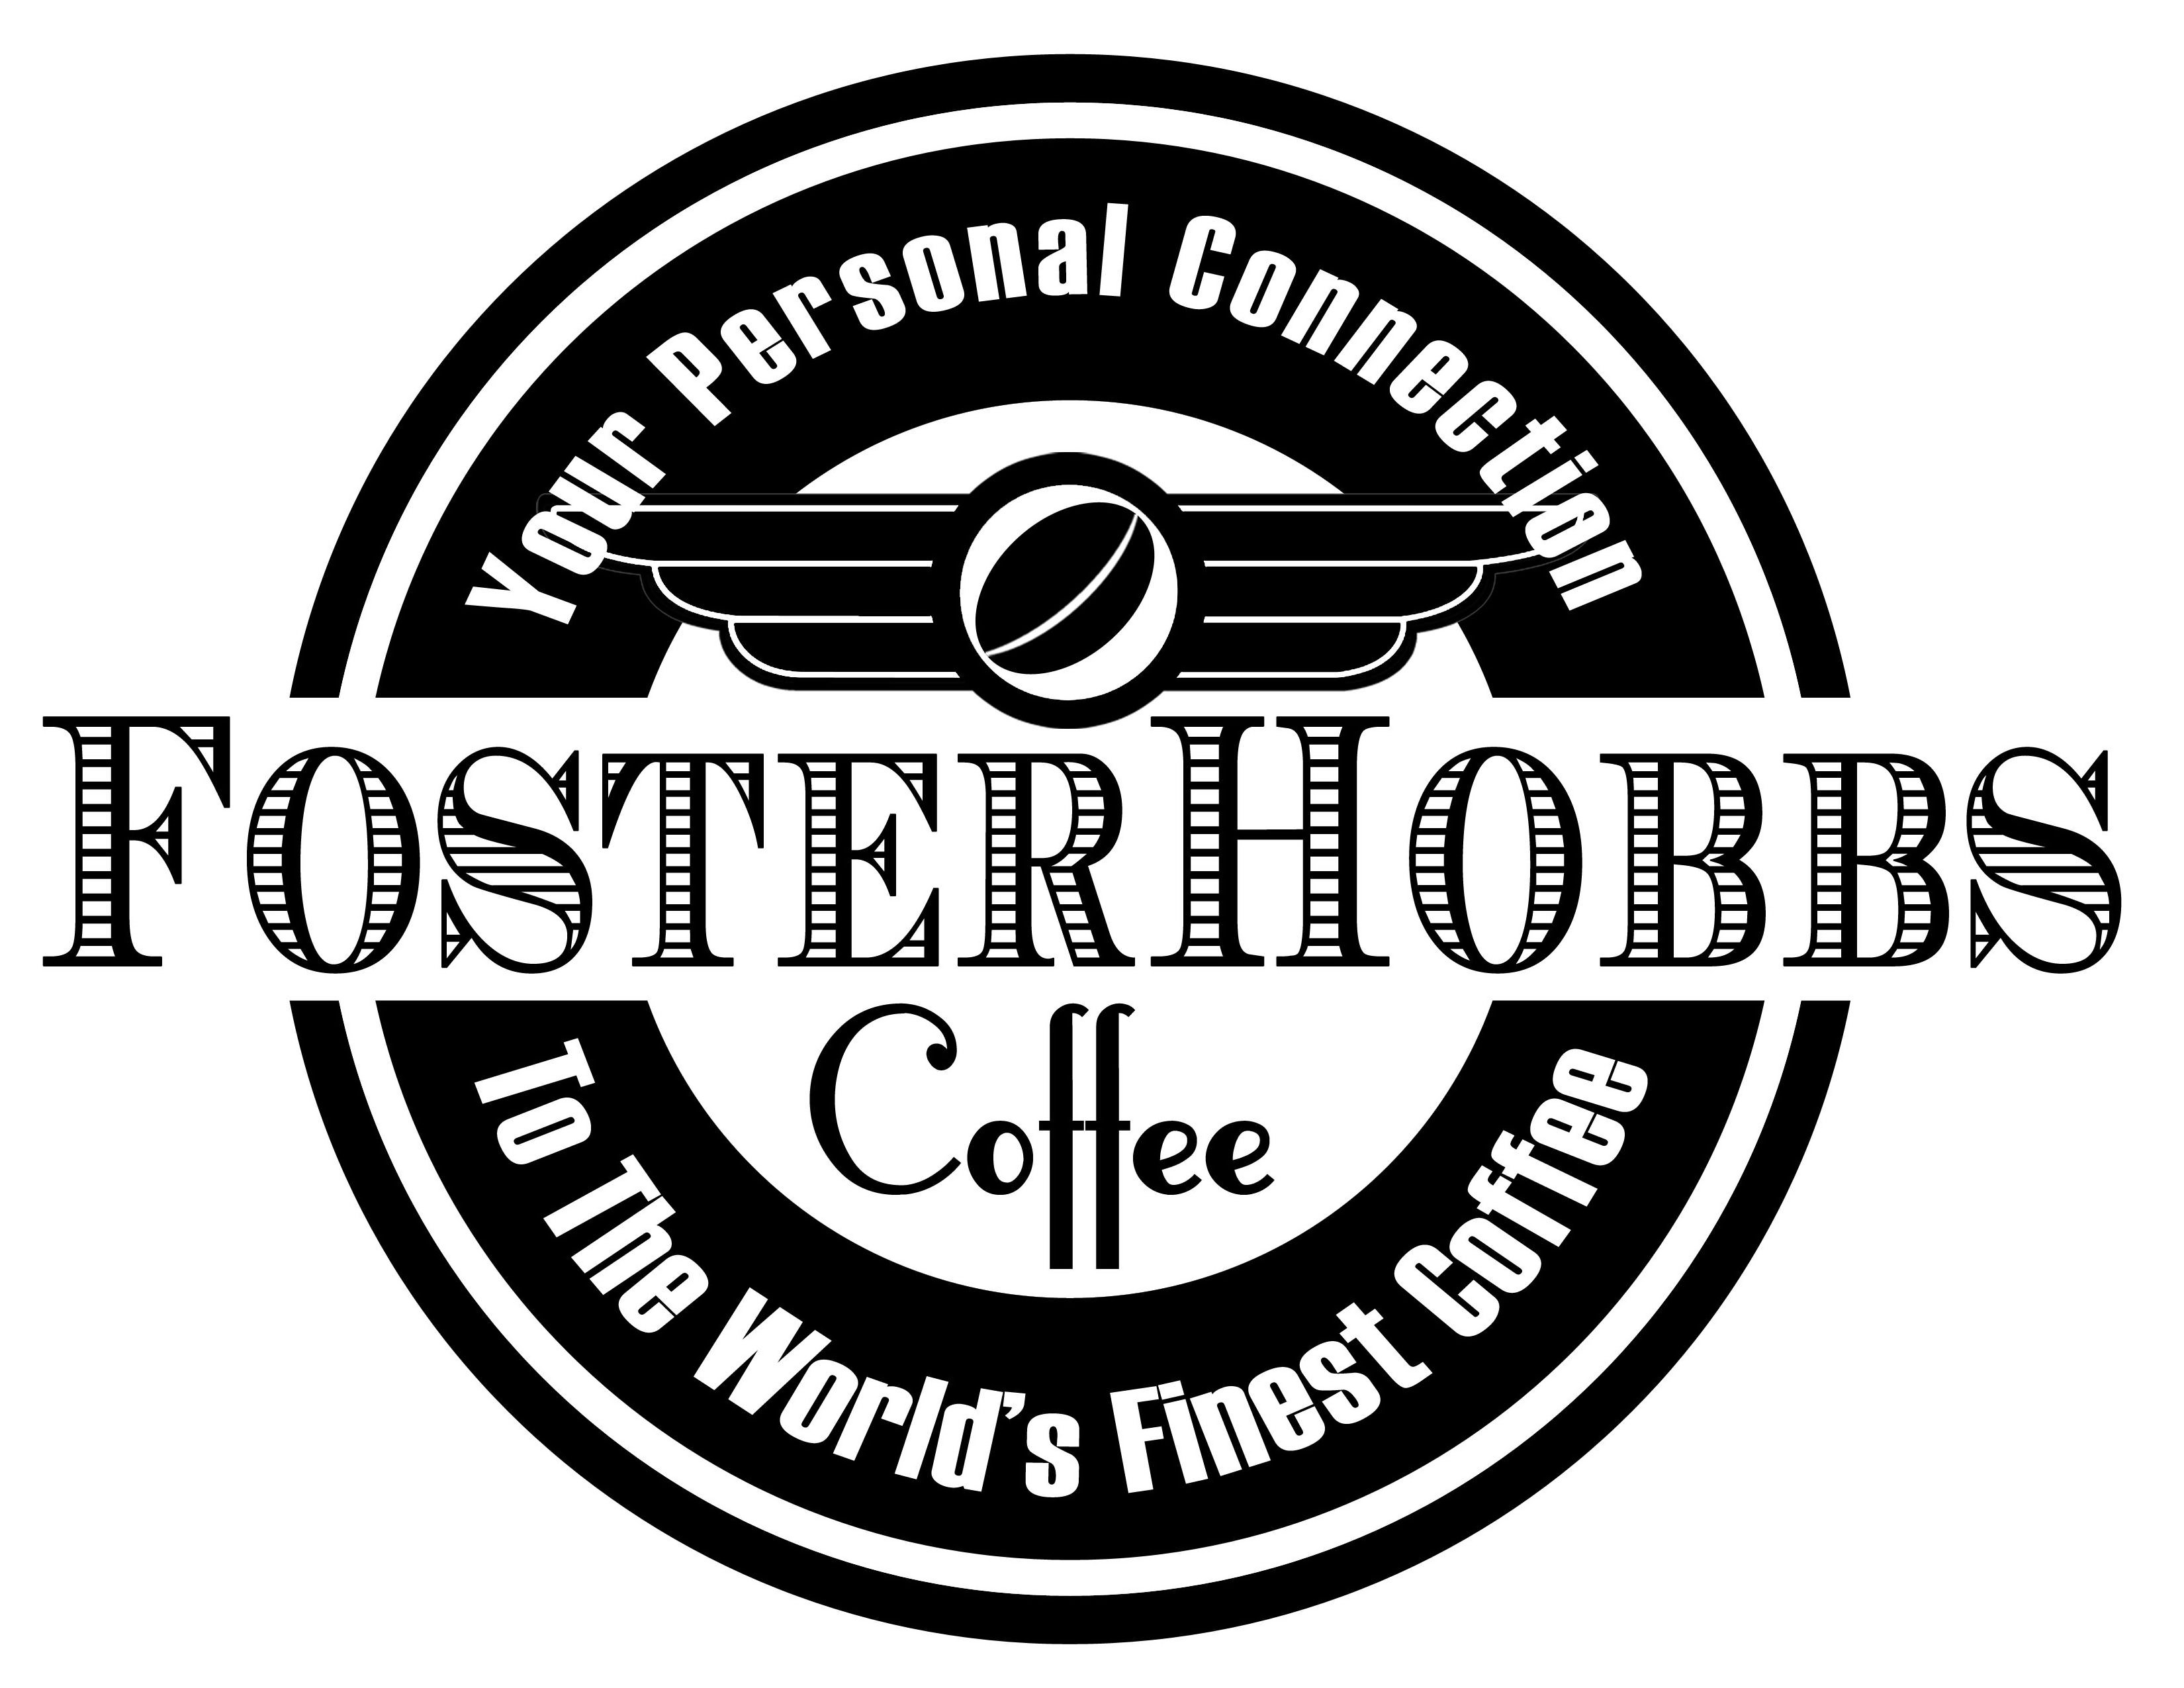  FOSTERHOBBS COFFEE YOUR PERSONAL CONNECTION TO THE WORLD'S FINEST COFFEE